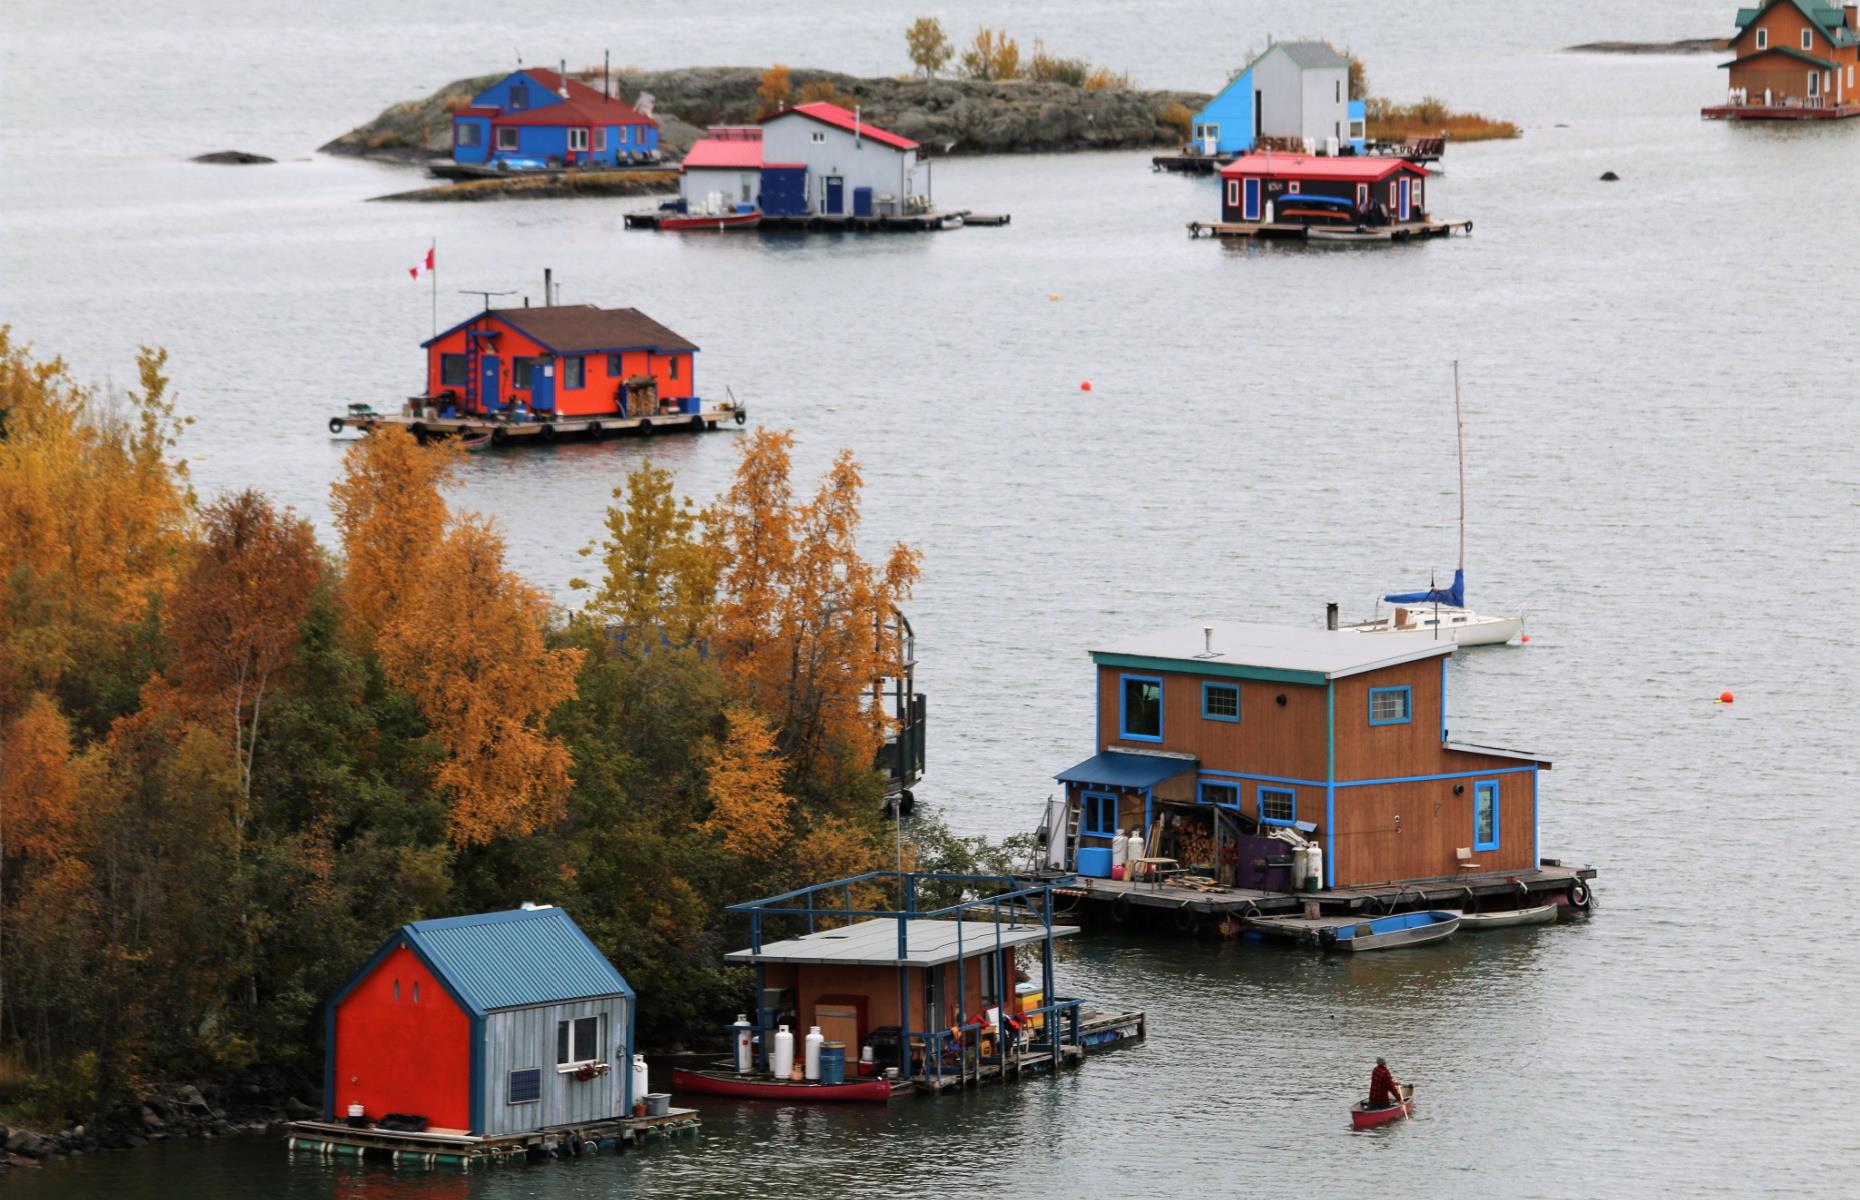 <p>Yellowknife isn’t a large city, but its location in Canada’s vast northern reaches grants it a good deal of natural appeal. It sits on the shores of Great Slave Lake, home to the city’s famous houseboats and their stunning views out over the water, which freezes to an icy sheen during winter. The <a href="https://spectacularnwt.com/story/yellowknifes-old-town-canadas-weirdest-neighbourhood">Yellowknife Old Town</a> is eclectic and welcoming, with rustic wooden buildings, jackpine shacks, kayak rental shops, Indigenous influences and lake access.</p>  <p><strong><a href="https://www.loveexploring.com/galleries/93825/stunning-images-of-the-coldest-places-on-earth?page=1">See these stunning images of the coldest places on Earth</a></strong></p>